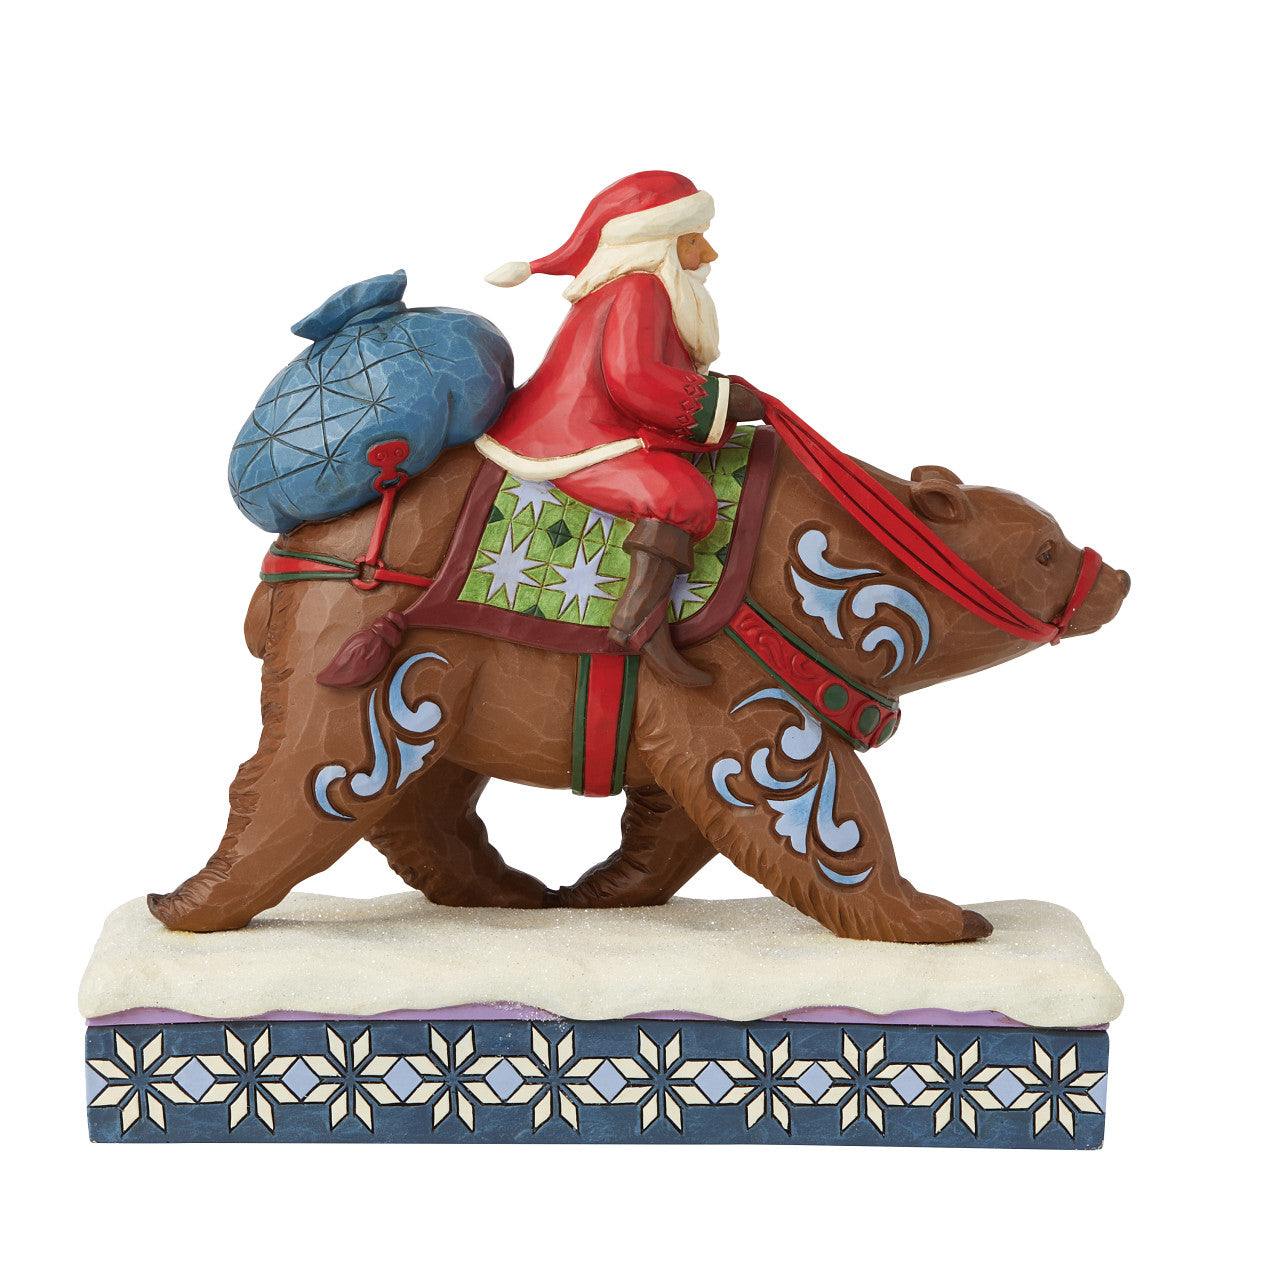 Bearing Gifts For One And All - Santa Riding A Bear Figurine